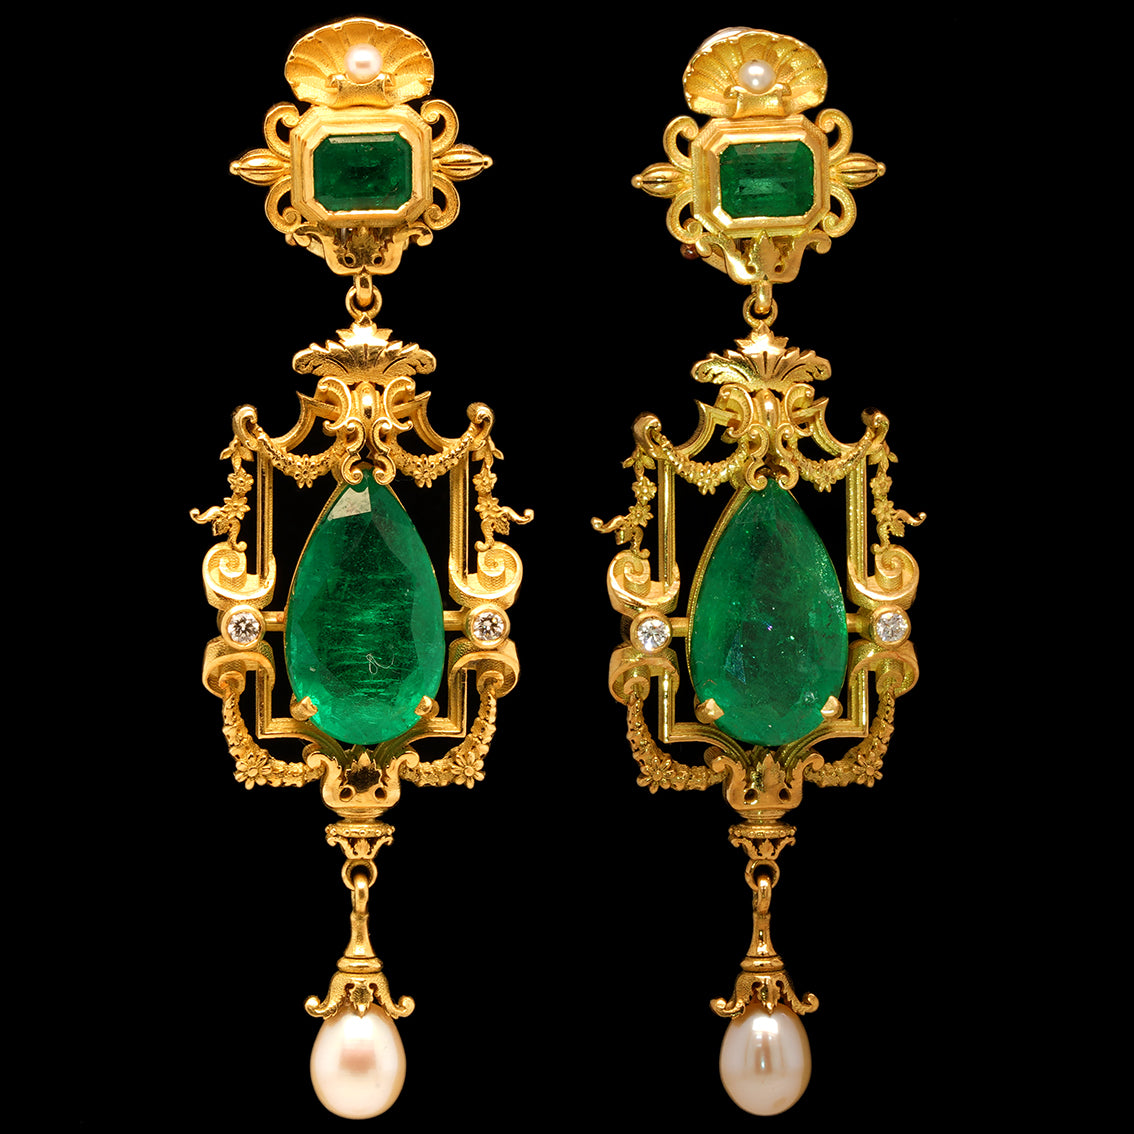 VENUS WITH A MIRROR EMERALD EARRINGS